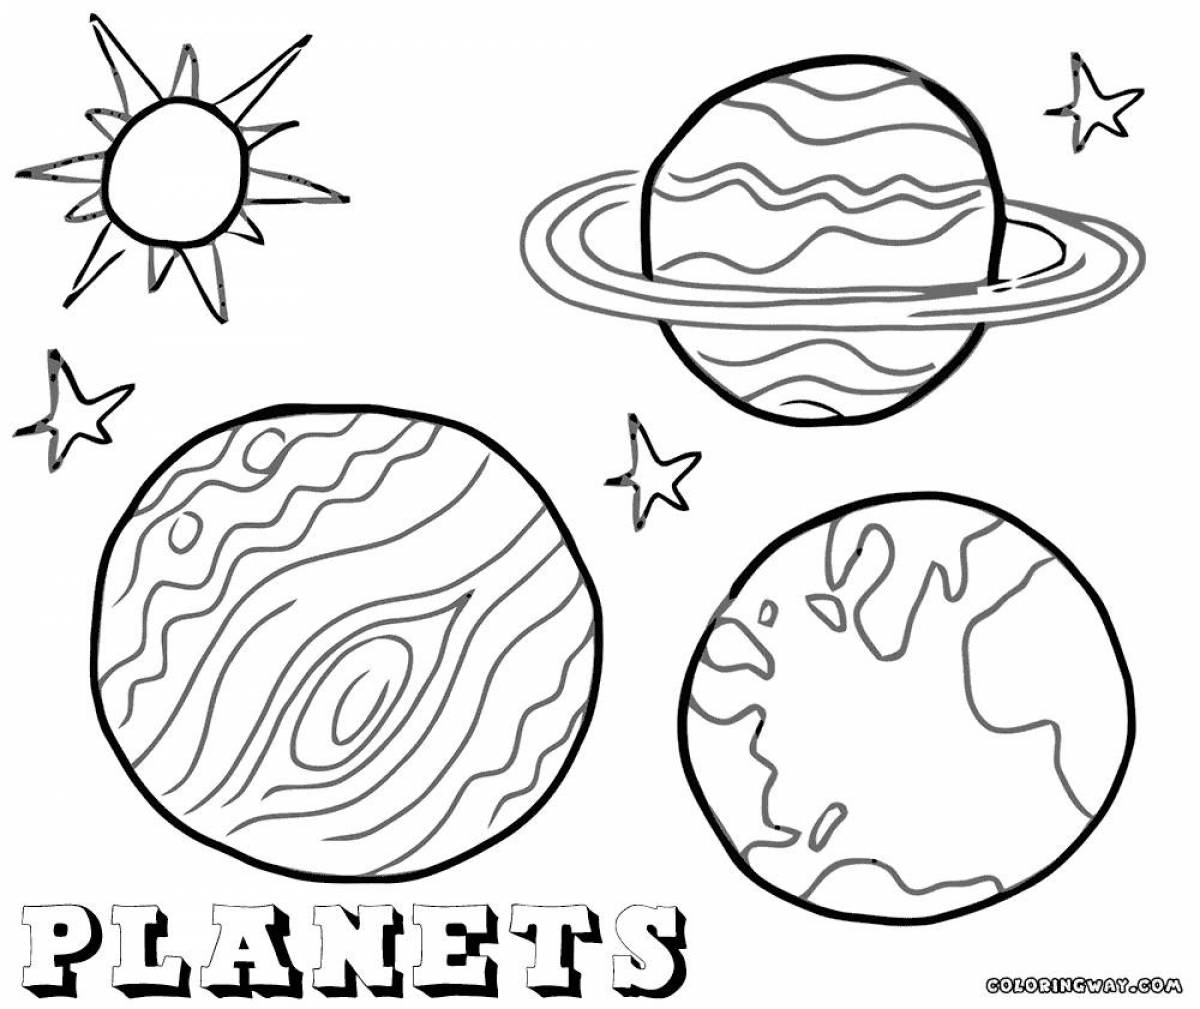 Colour interactive coloring book of the planets of the solar system for children